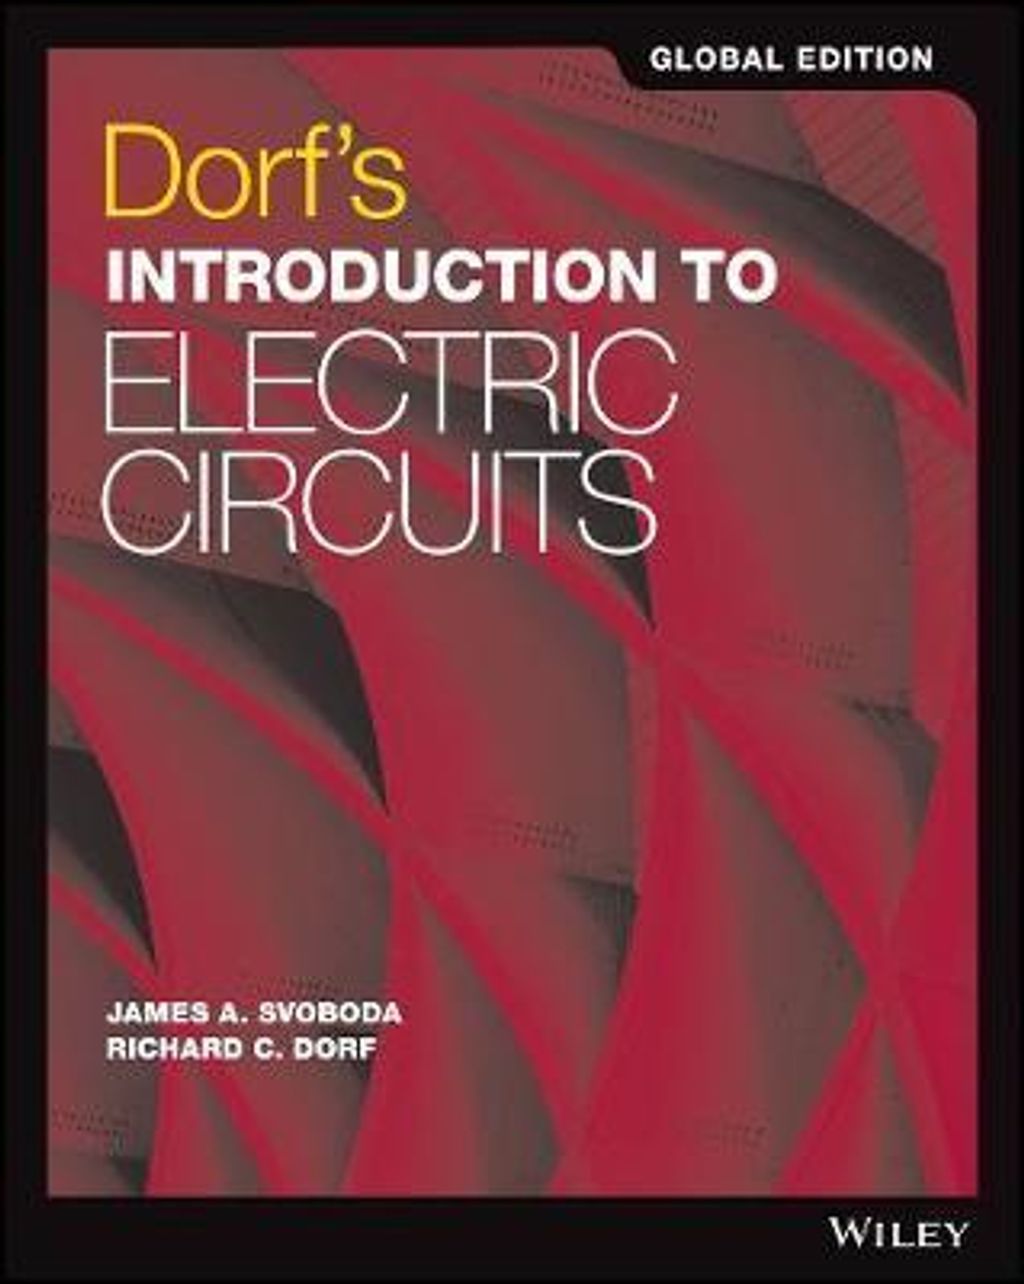 9781119454151 INTRODUCTION TO ELECTRIC CIRCUIT DORF.jpg